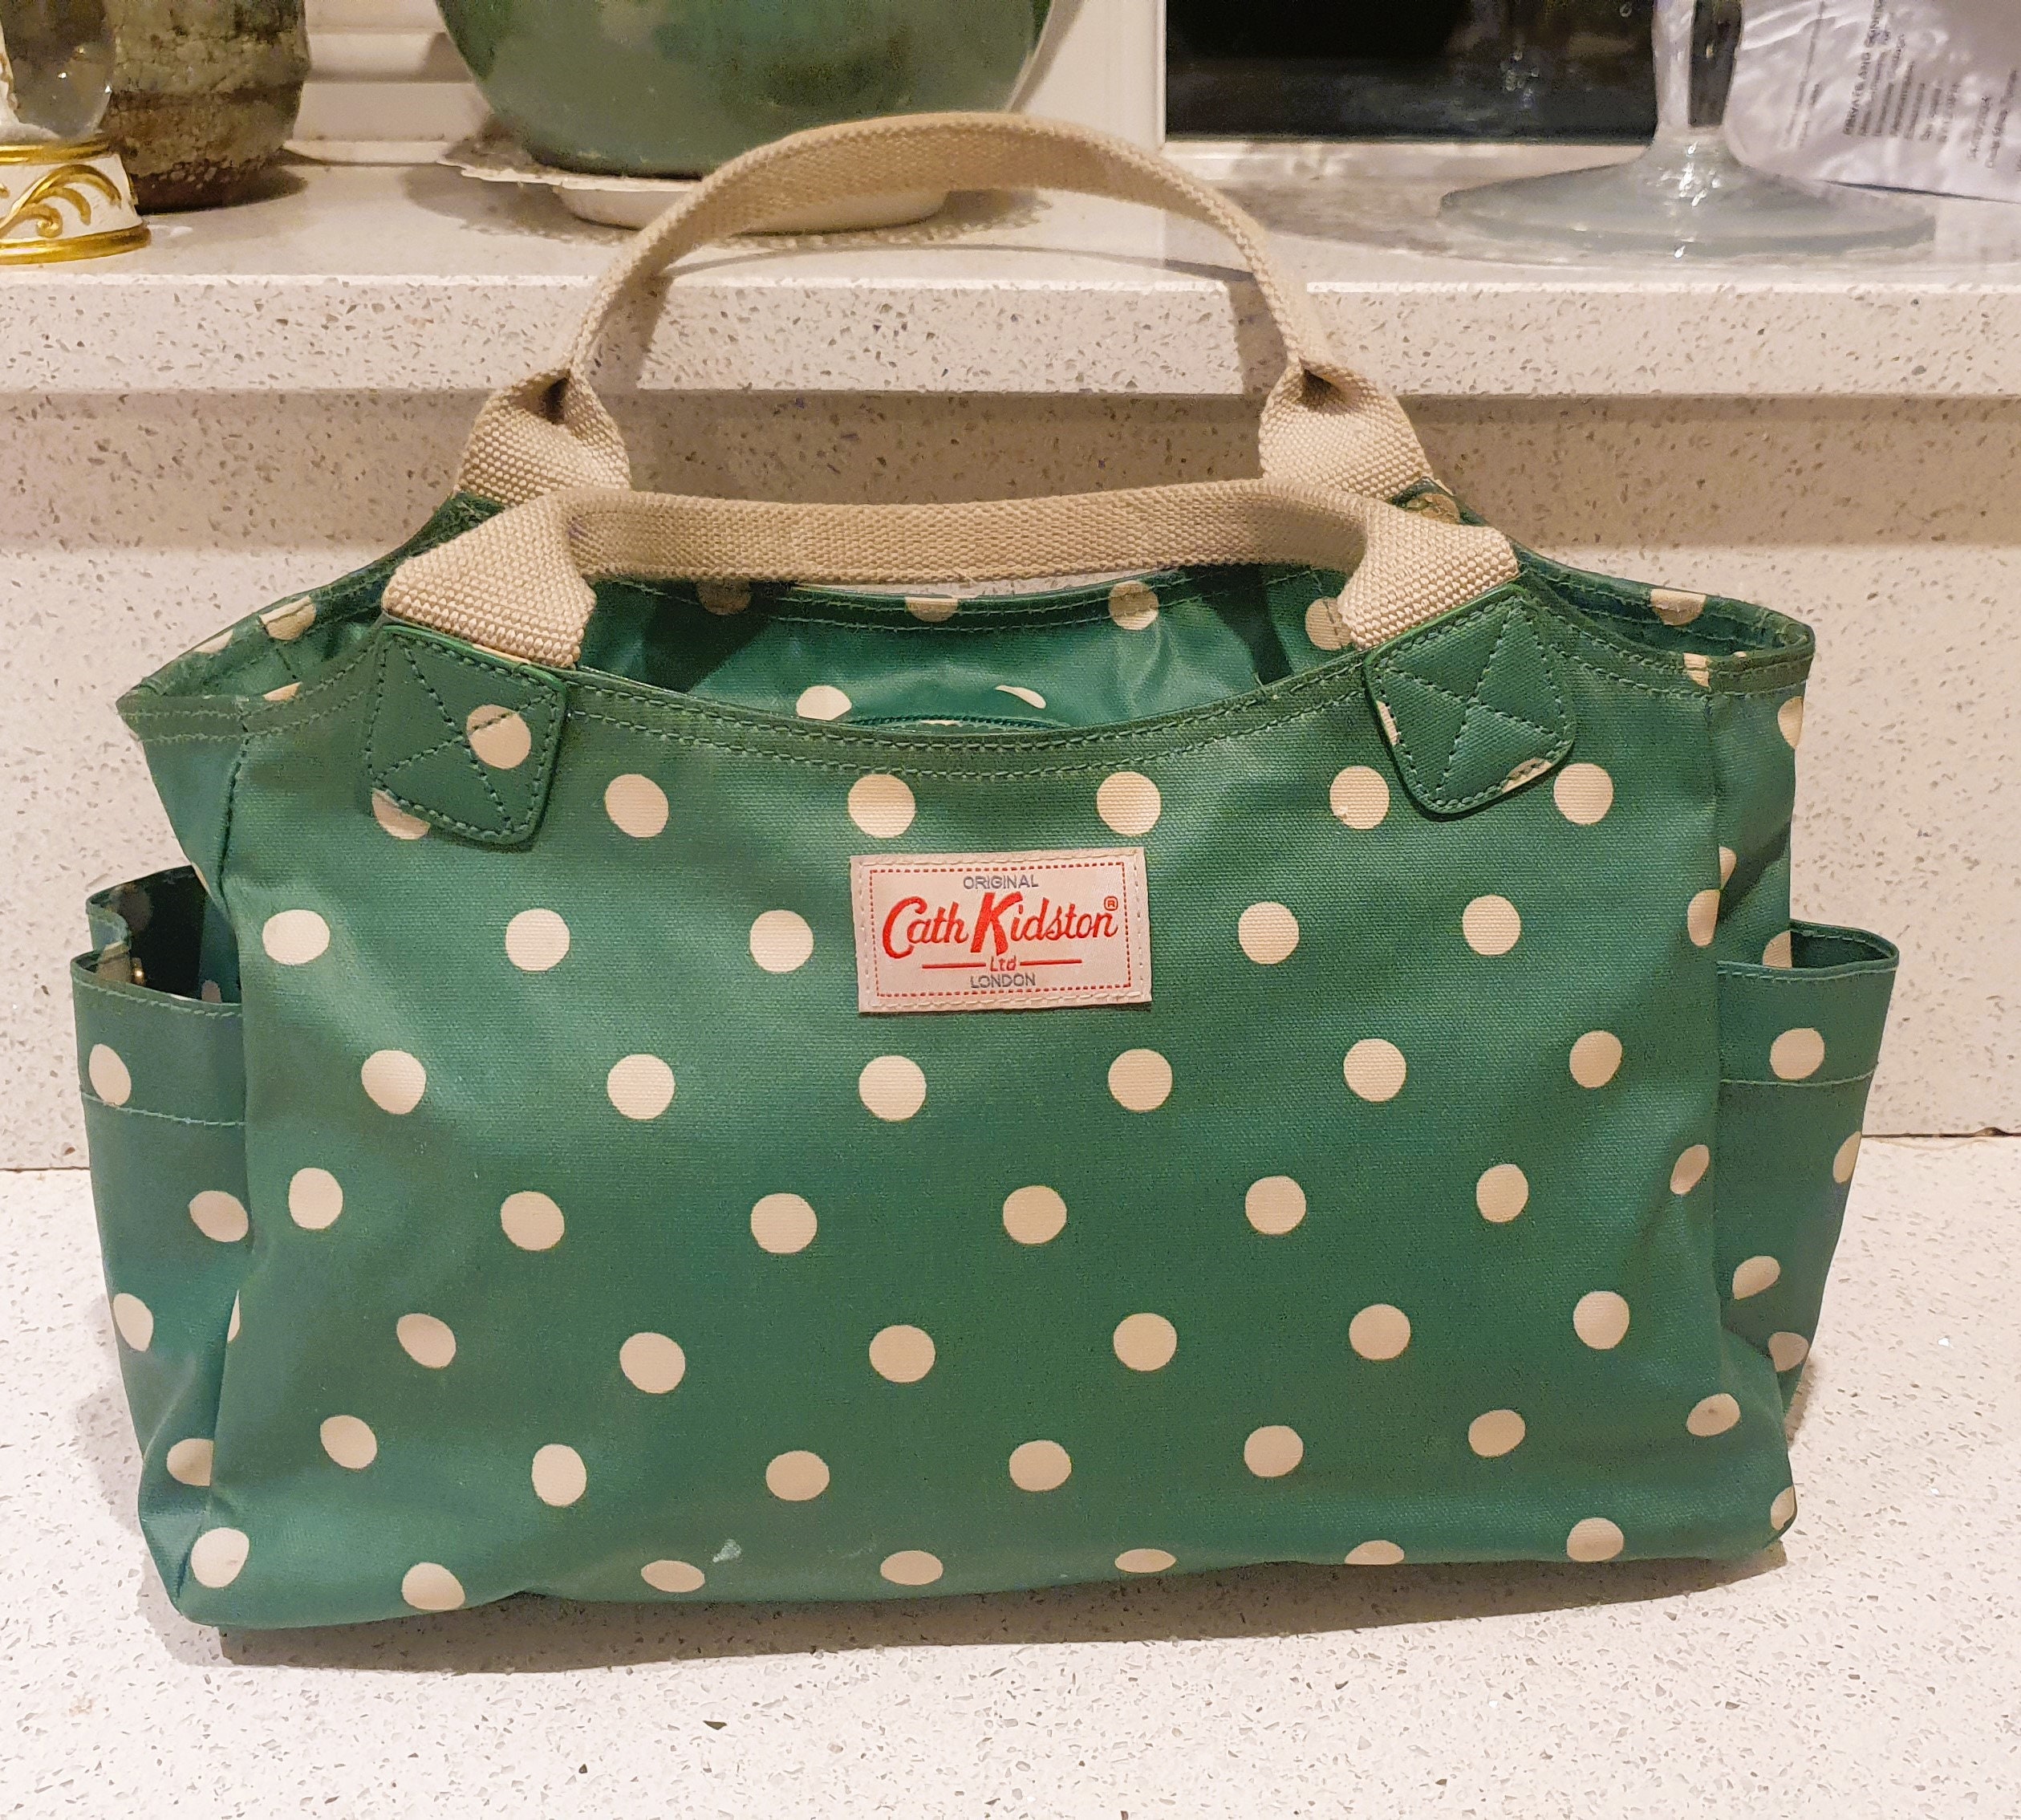 New season = new bag! - Cath Kidston Email Archive